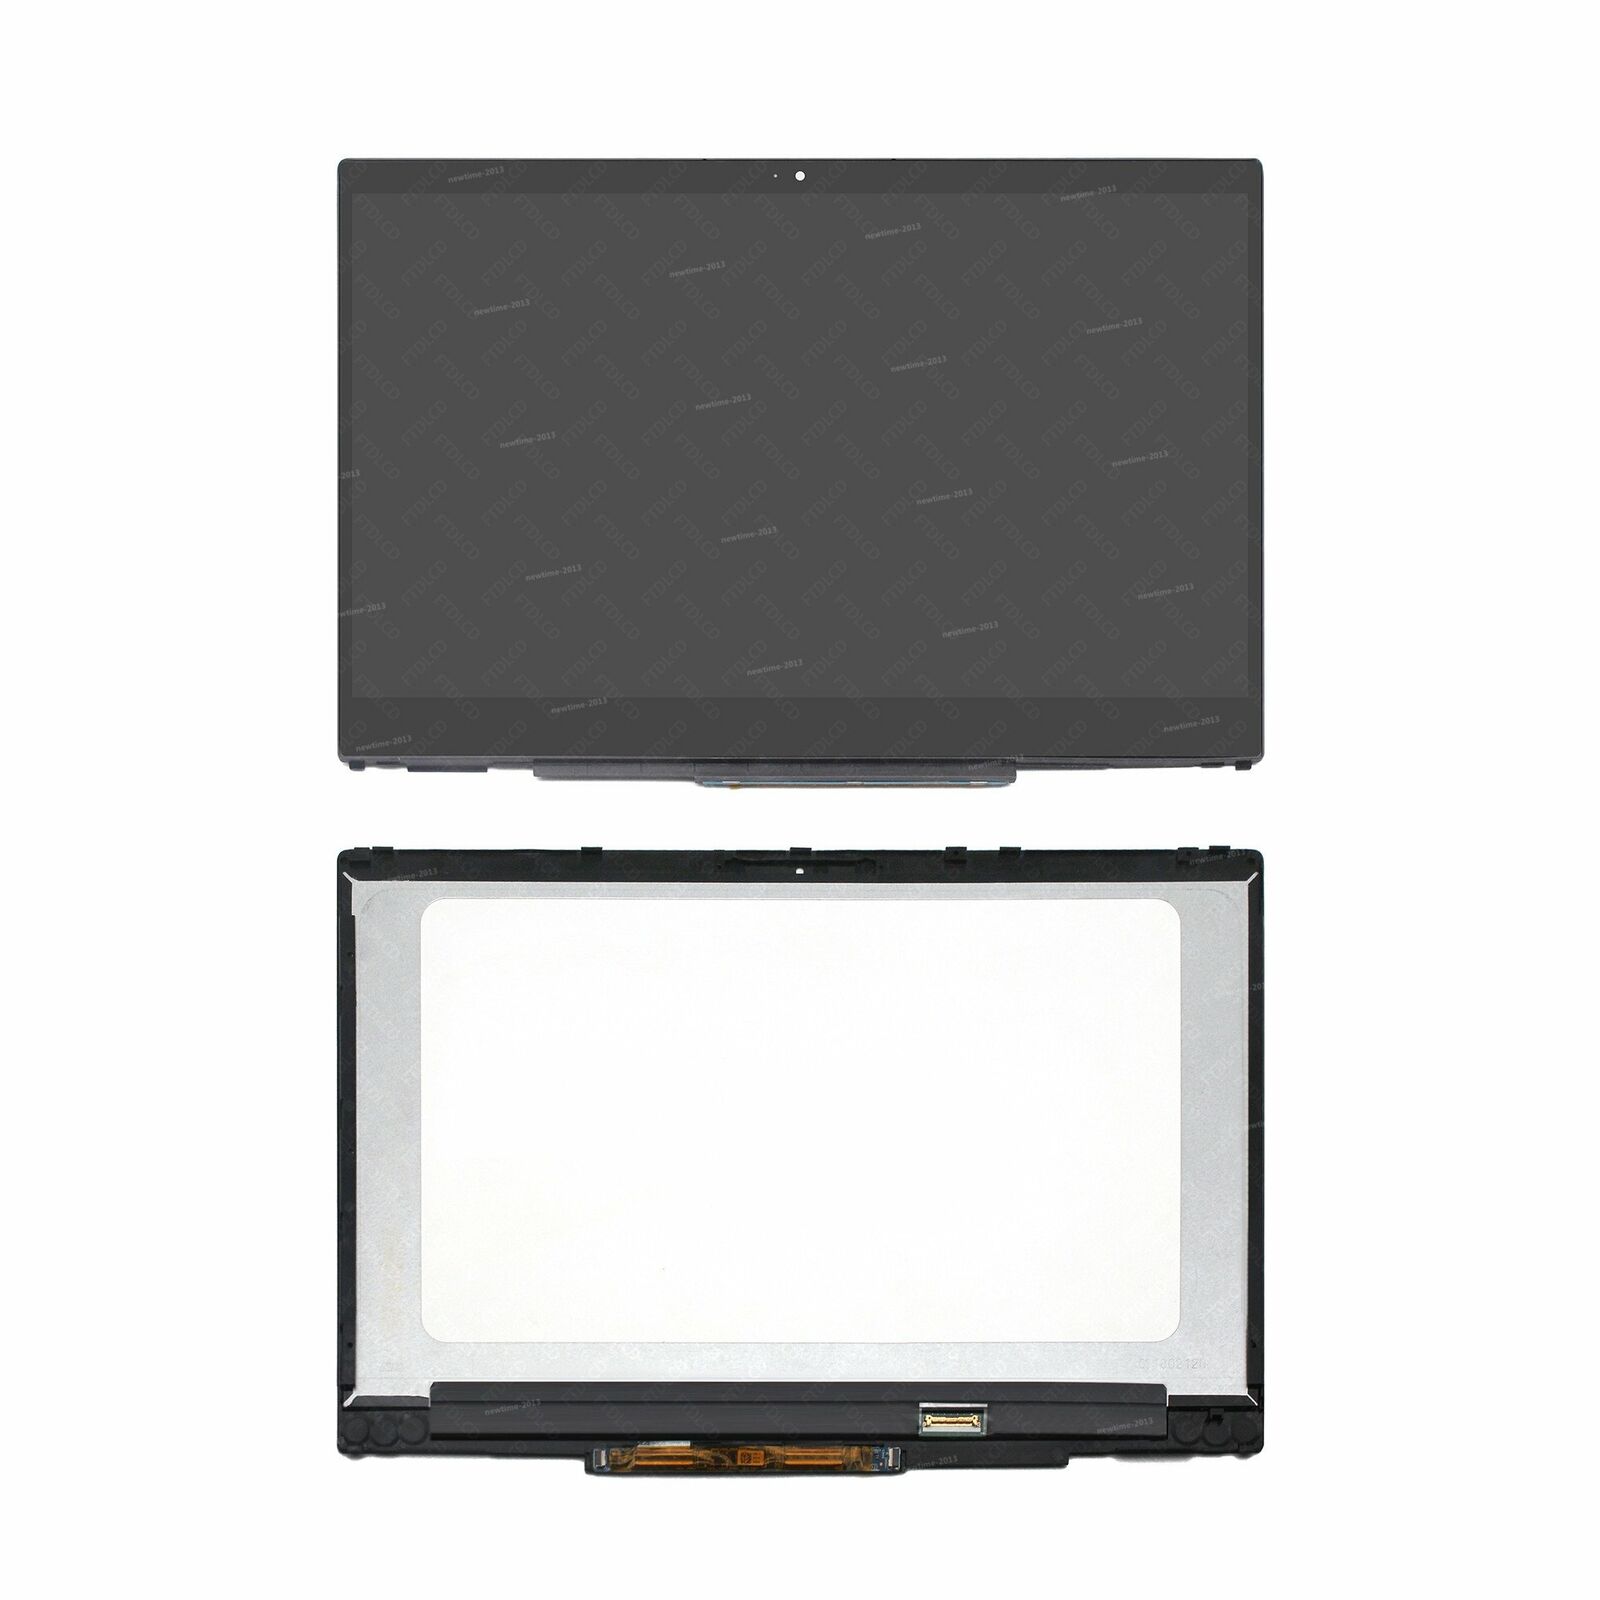 FHD IPS LCD Touch Screen Digitizer +Bezel for HP Pavilion x360 15-cr0062st 15-cr